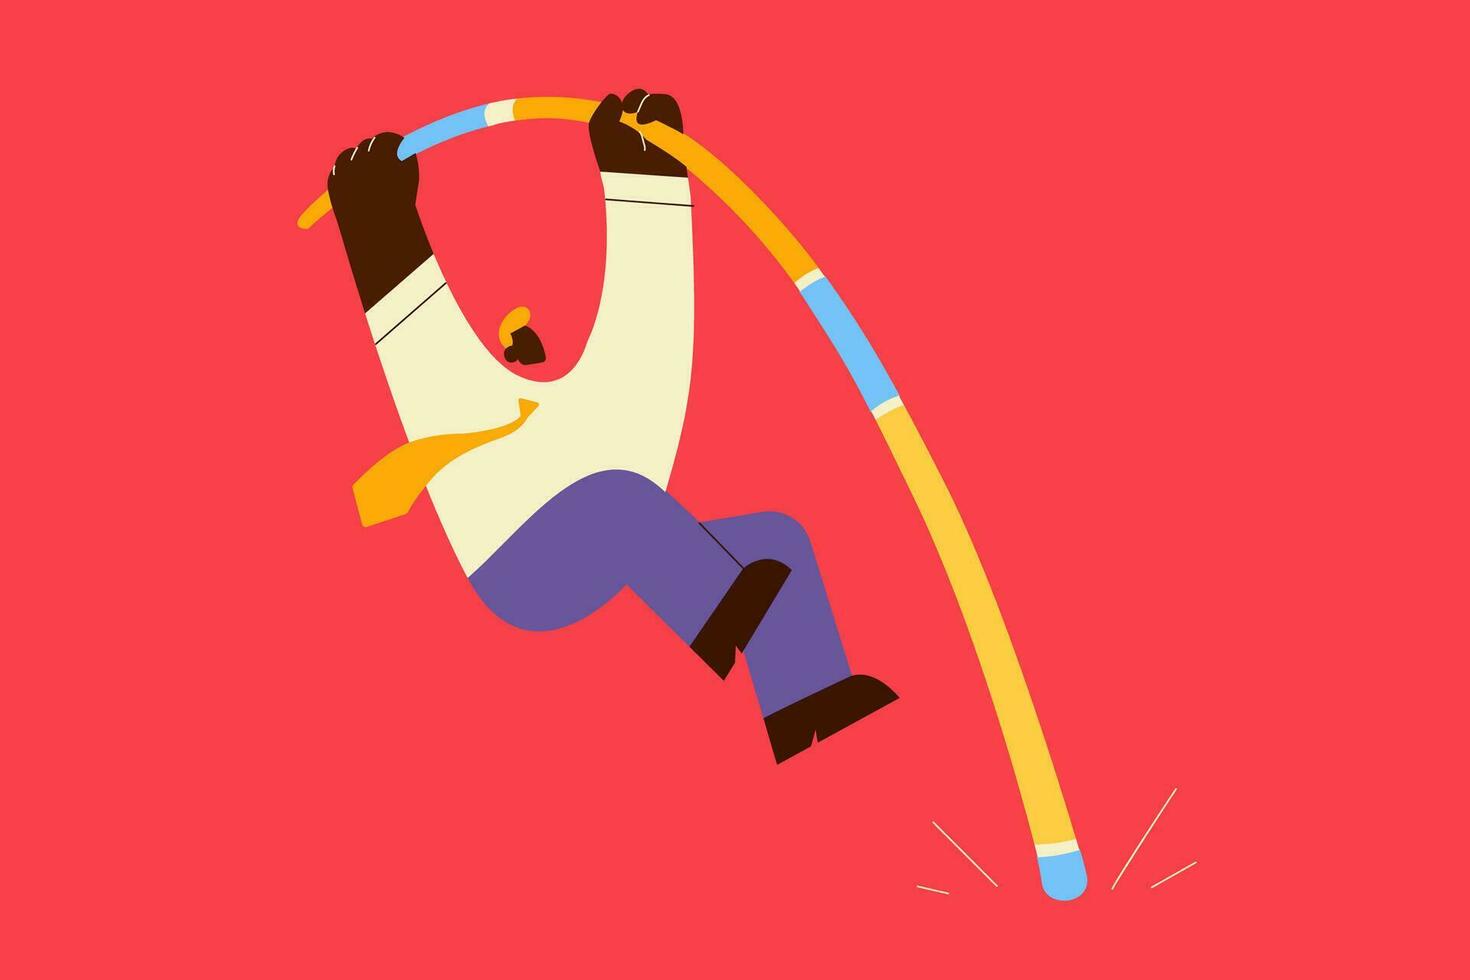 Challenge, success, risk concept. Businessman cartoon character jumping with pole vault to achieve good high results and overcome difficulties over red background vector illustration